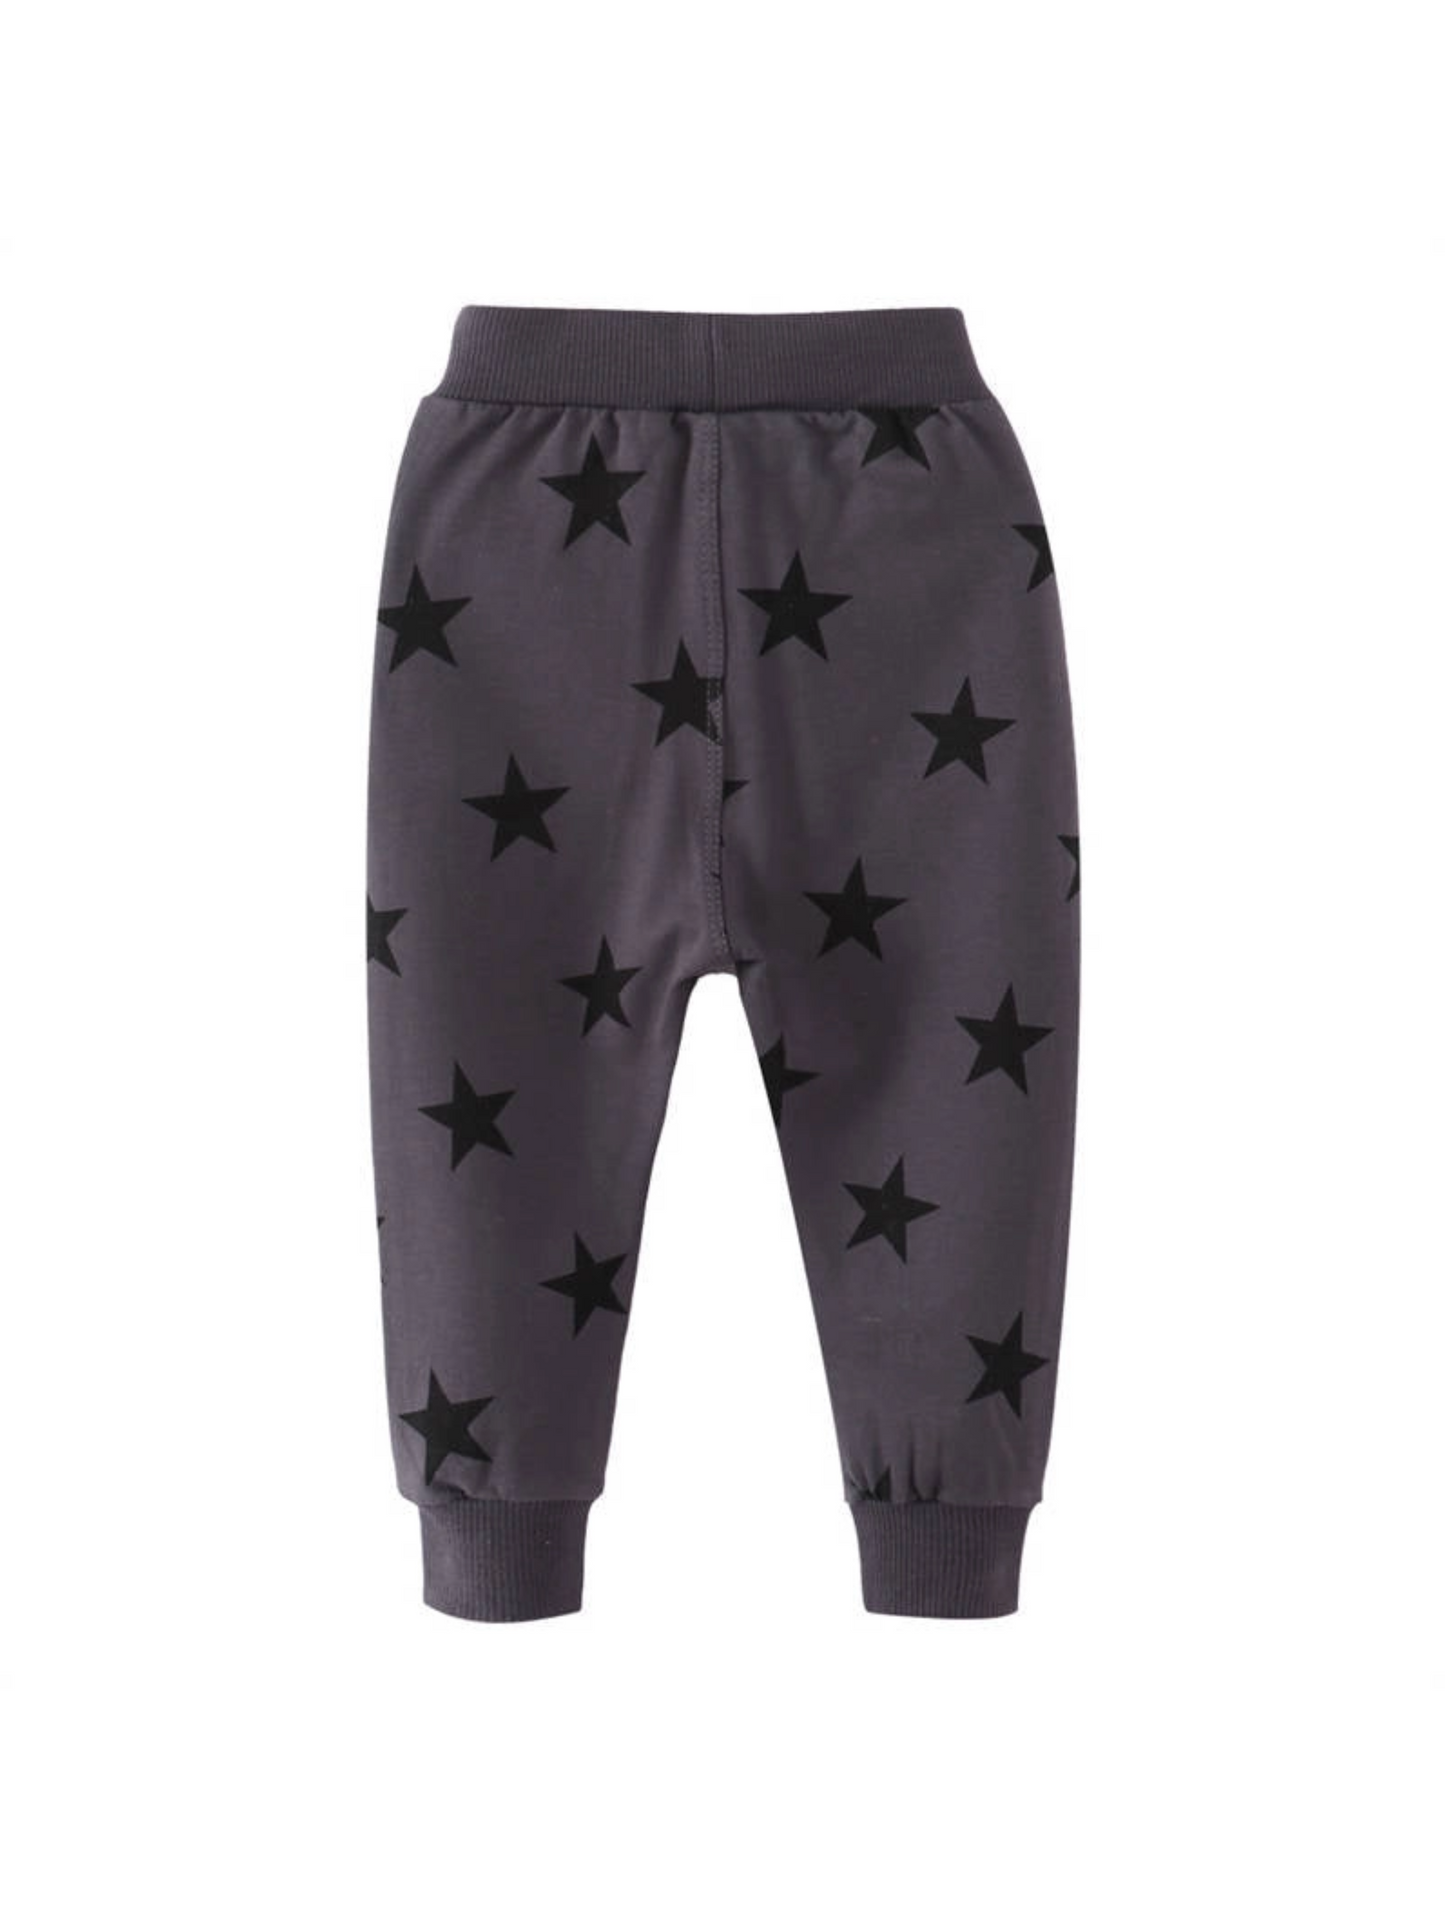 BOYS STAR PLAYER JOGGER IN GRAY - THE LITTLE EAGLE BOUTIQUE